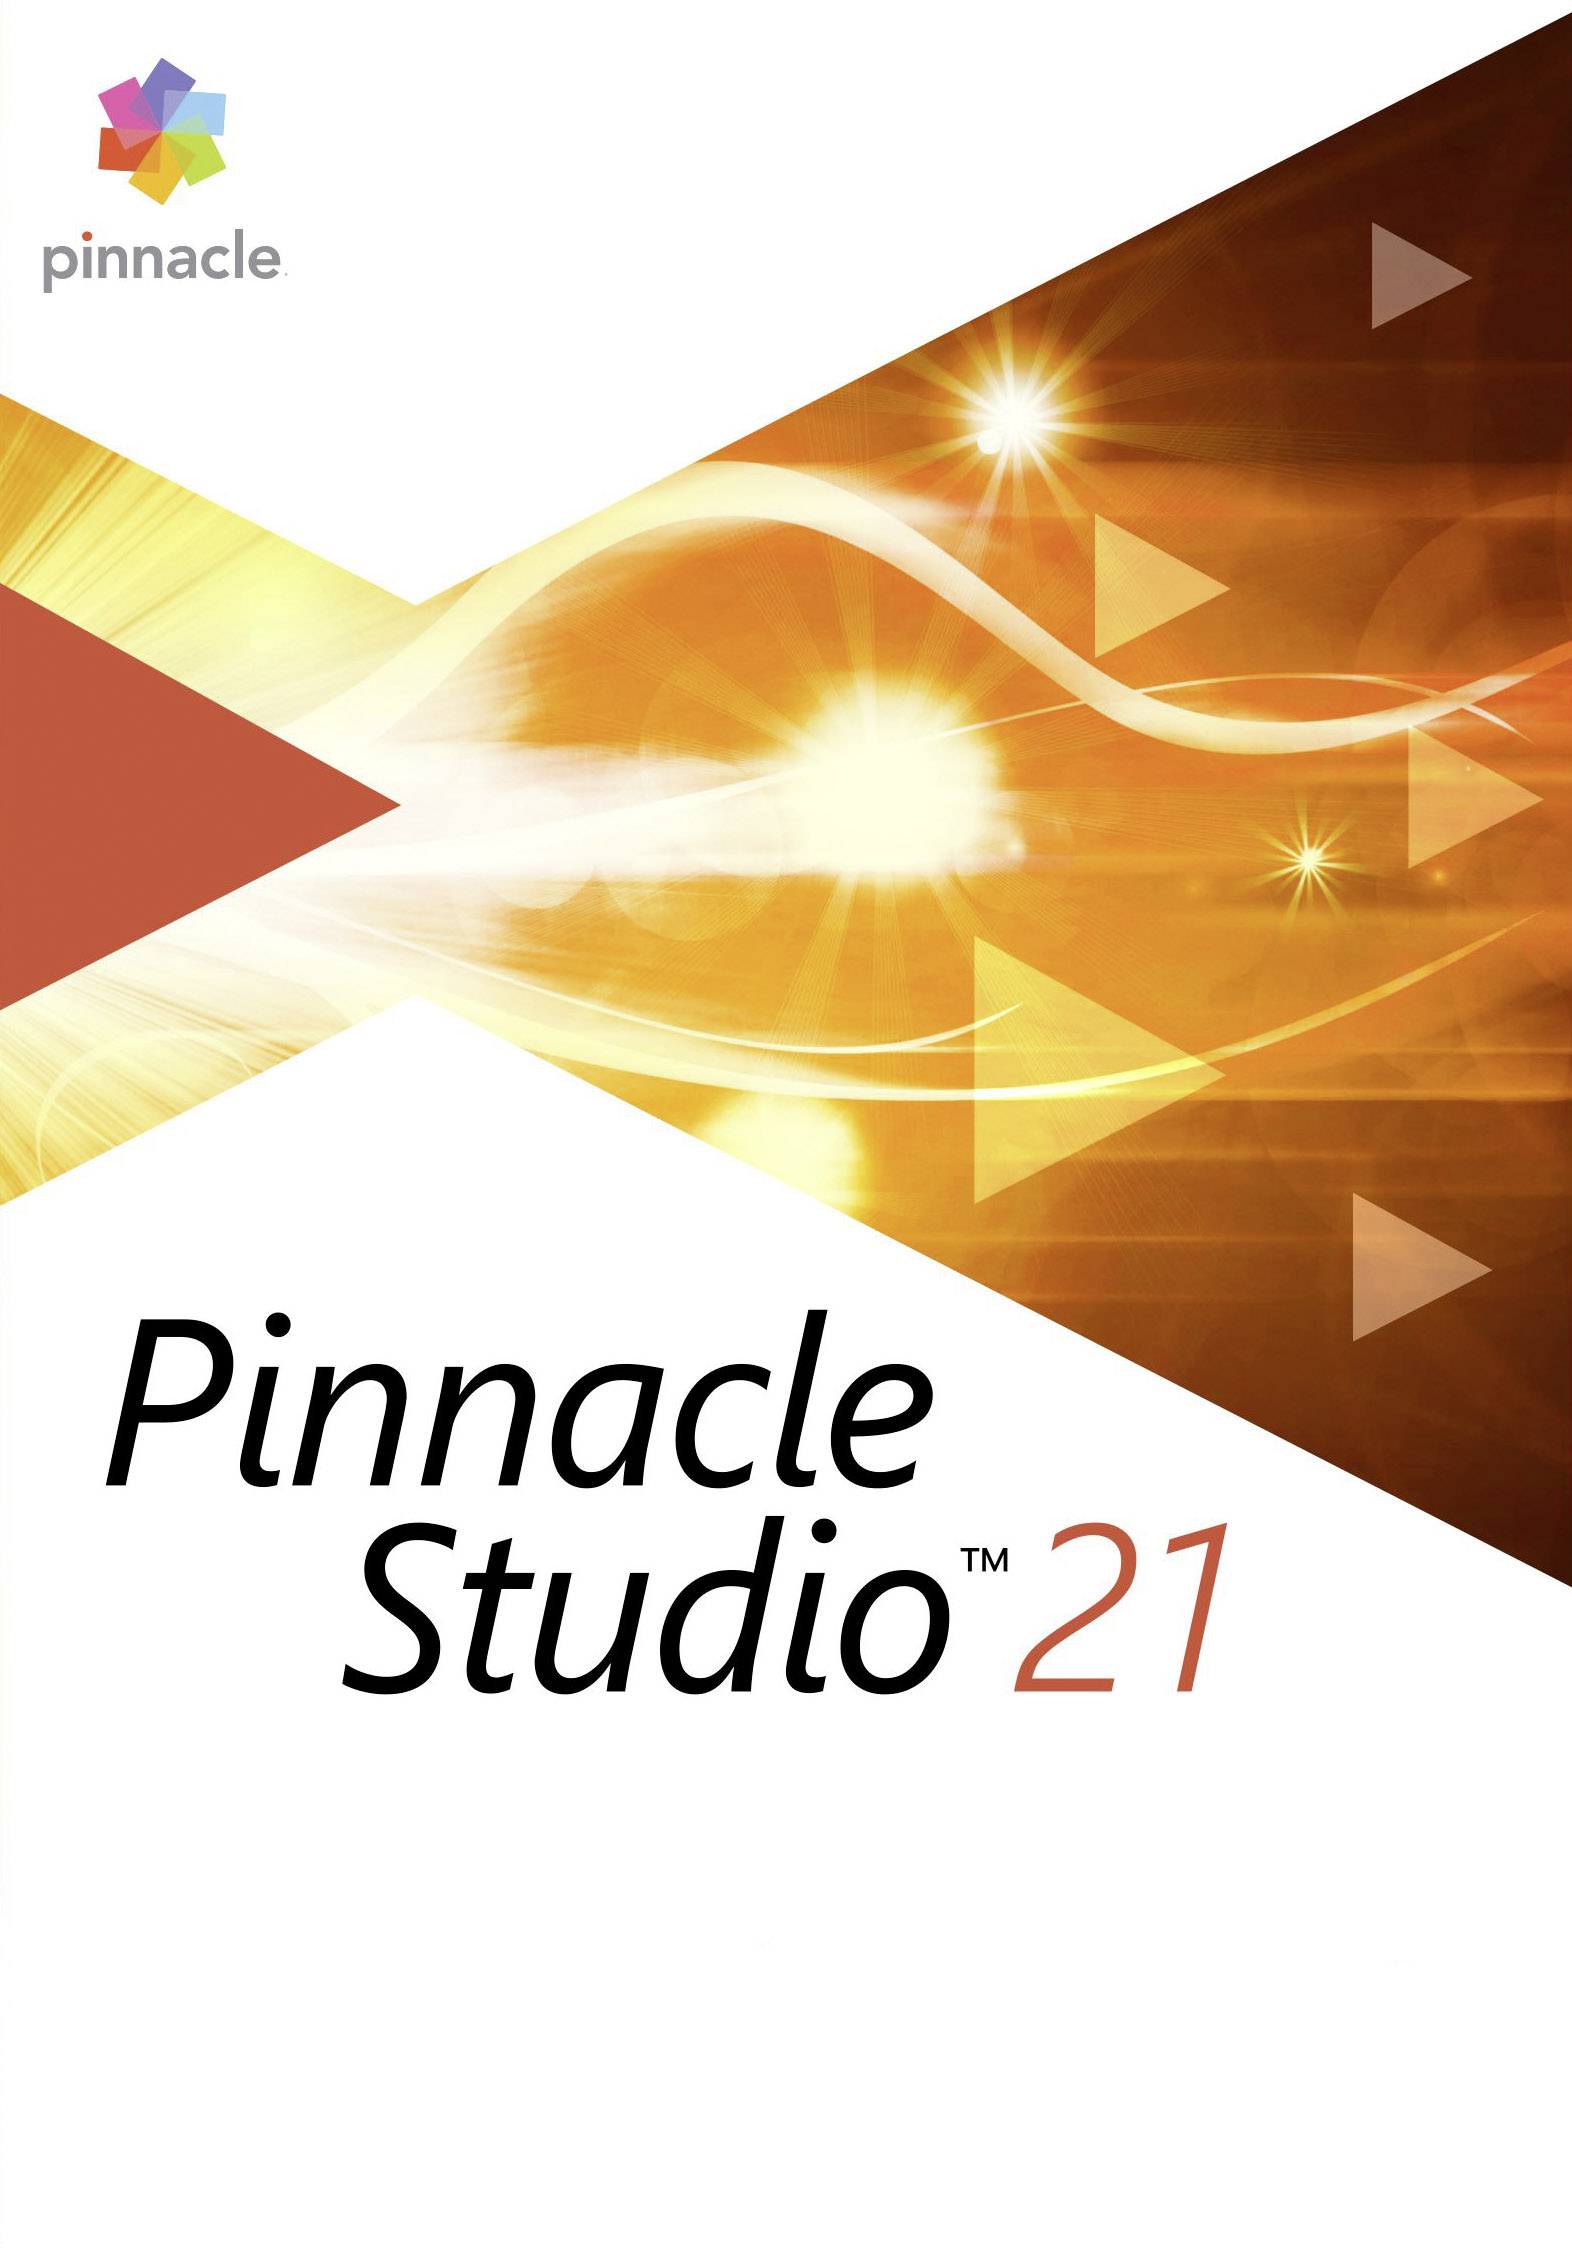 why does pinnacle studio 21 close when i export a file in windows 10